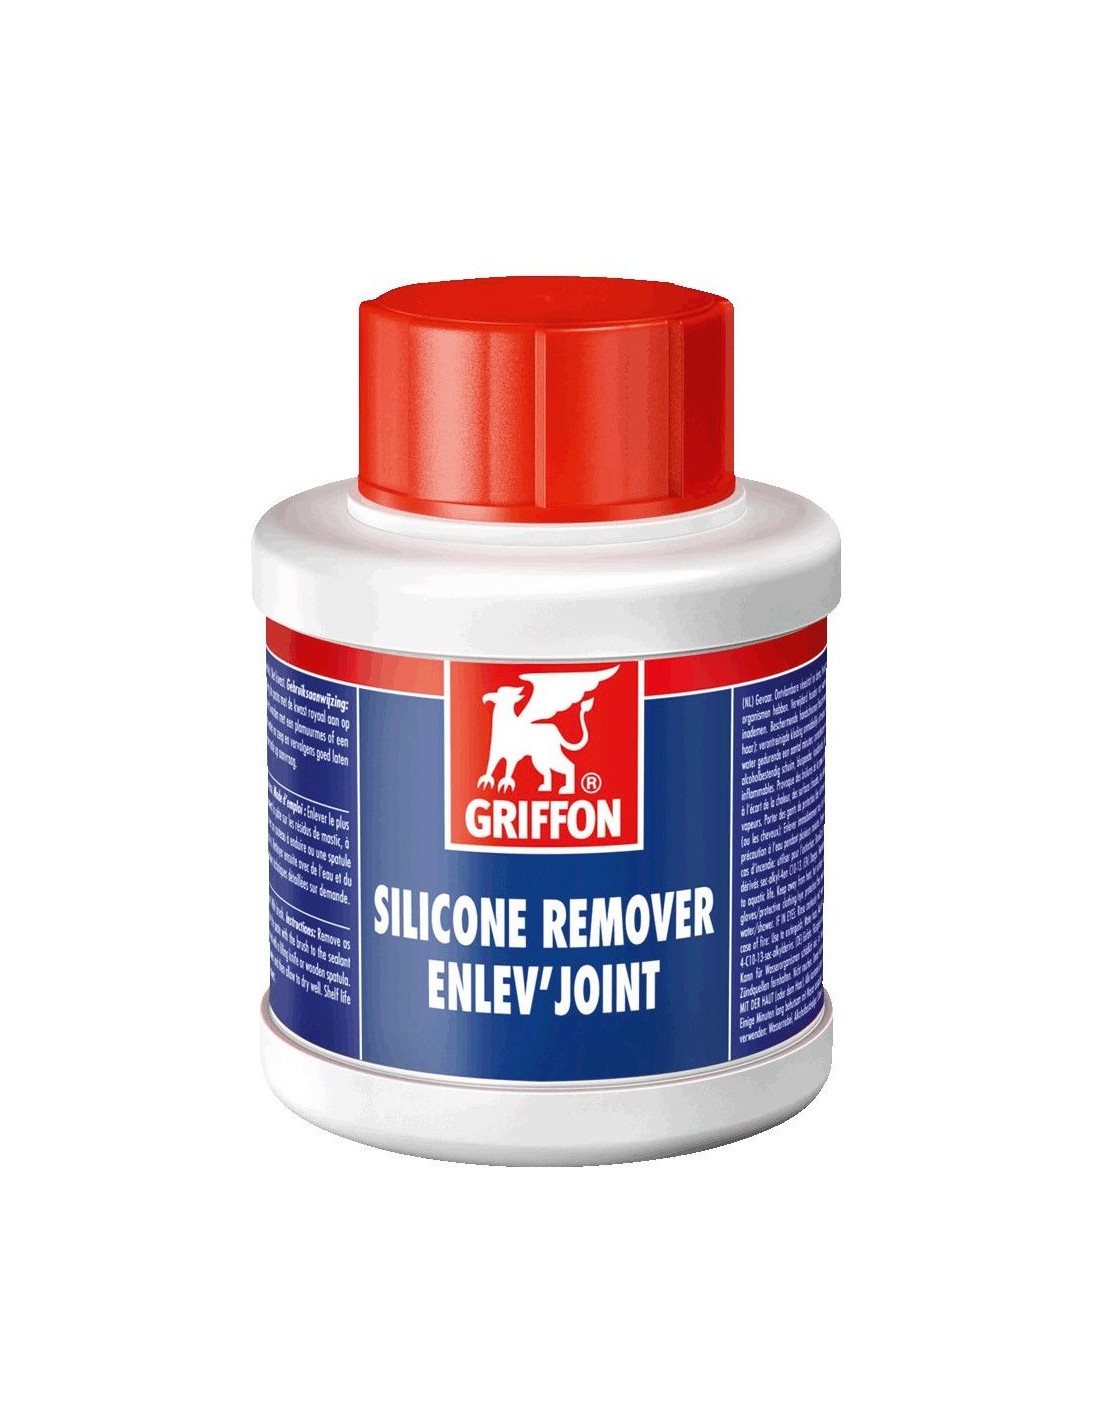 Enlever joint silicone